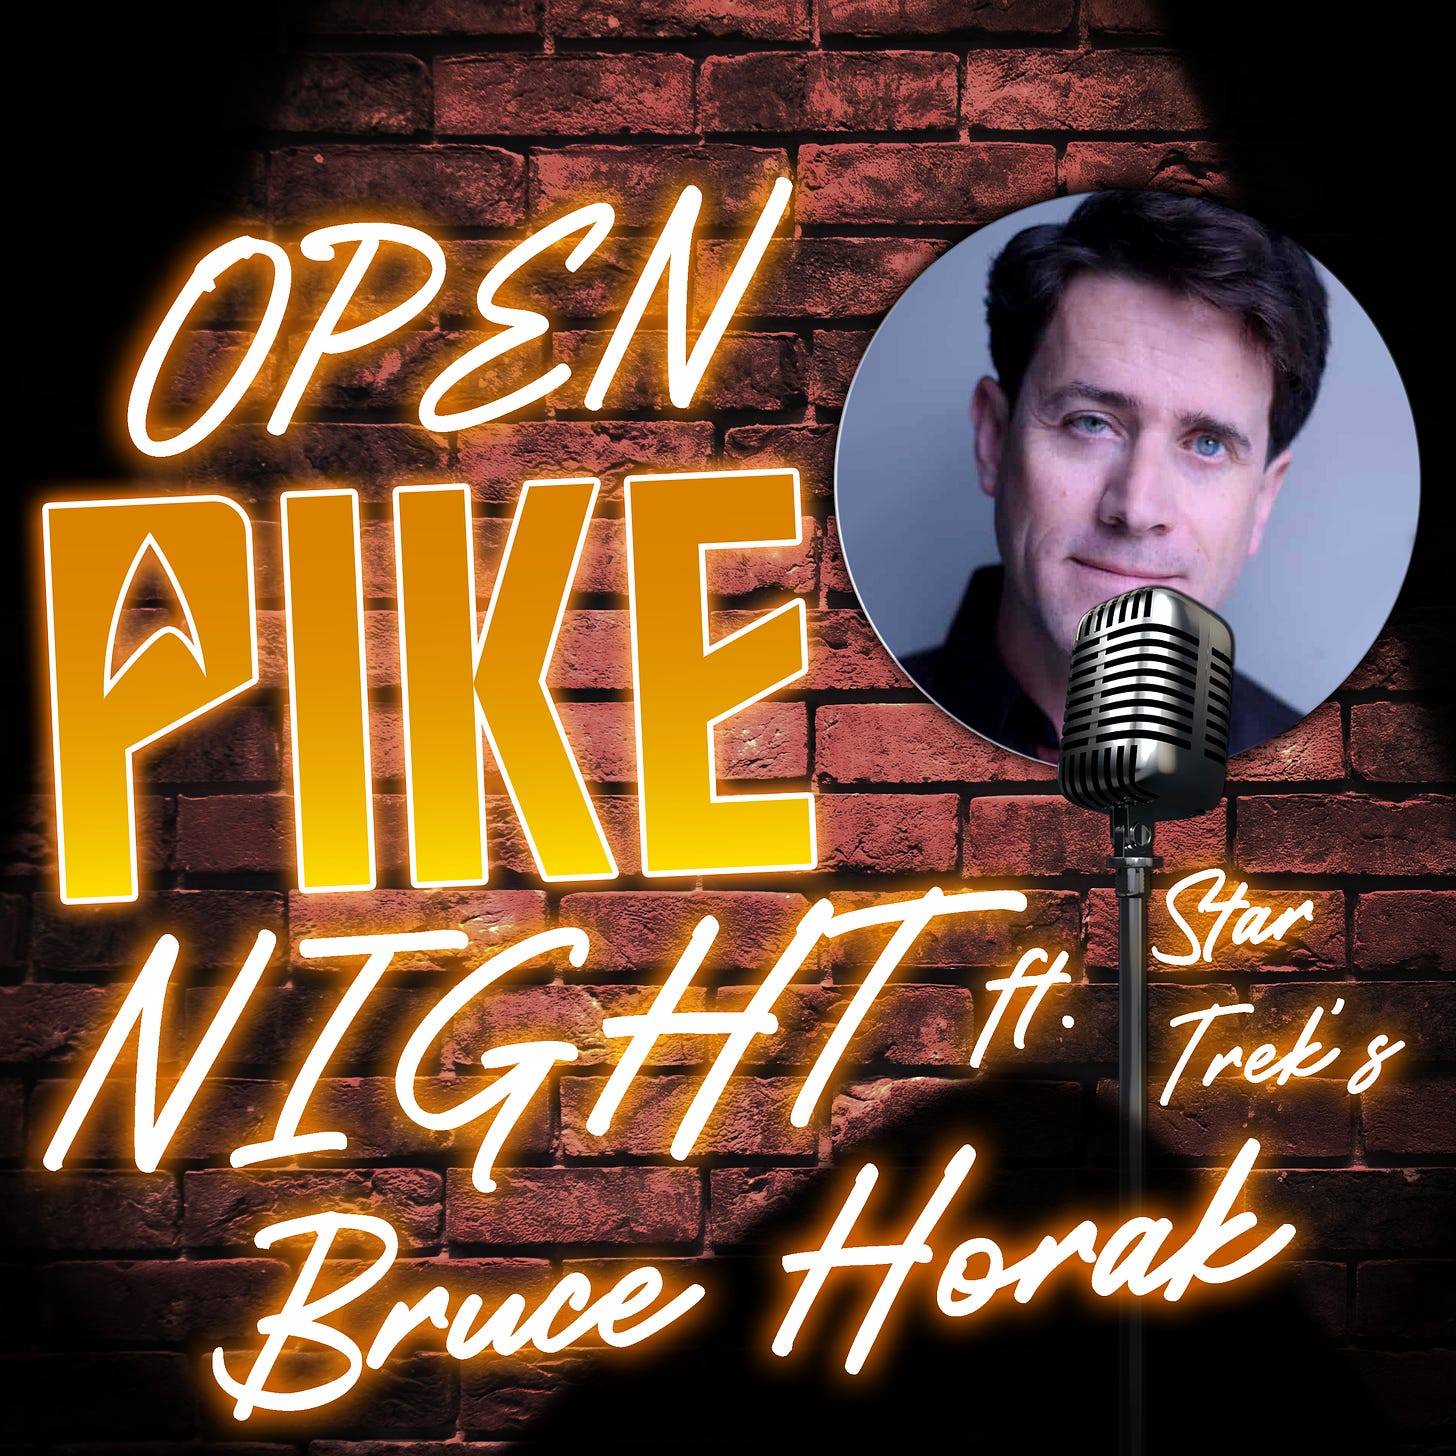 Open Pike Night cover art featuring Bruce Horak